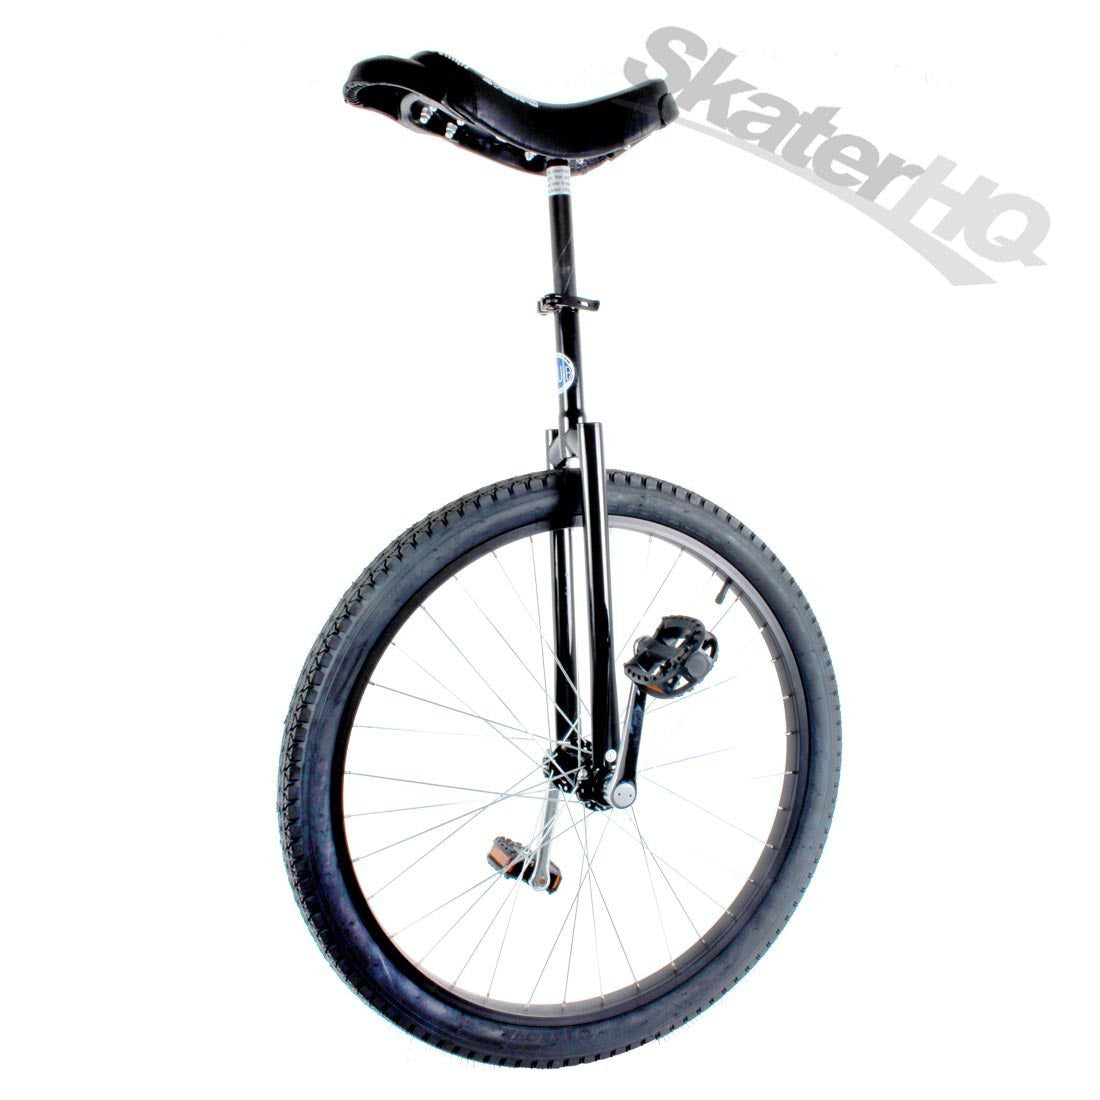 Club Freestyle 26inch Unicycle - Black Other Fun Toys